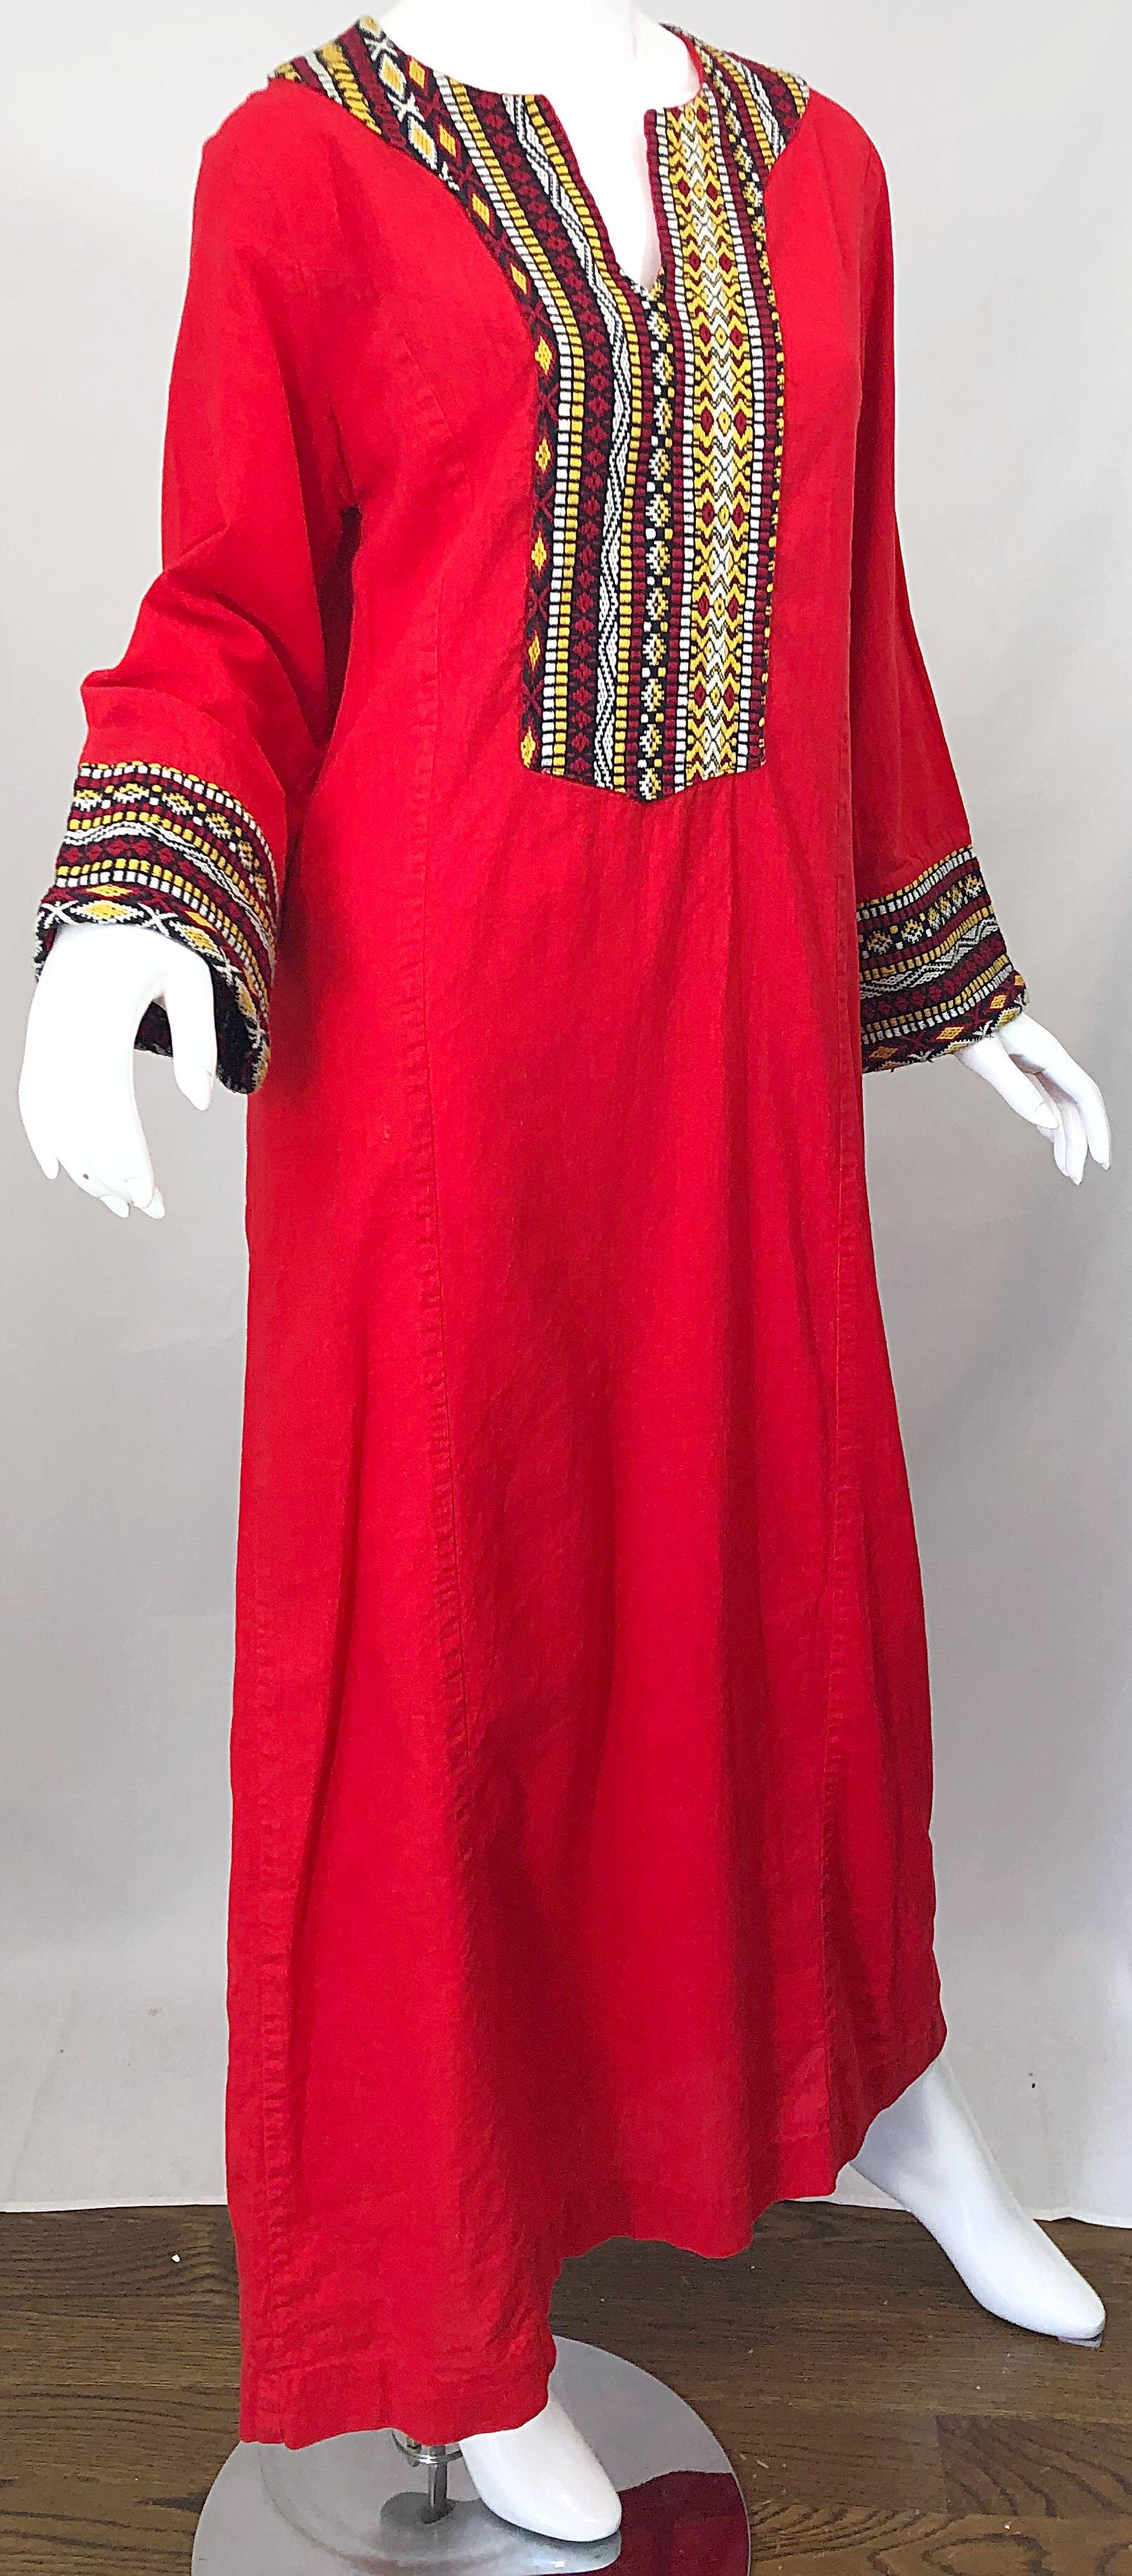 1970s Lipstick Red Embroidered Linen + Cotton Vintage 70s Caftan Maxi Dress For Sale 2